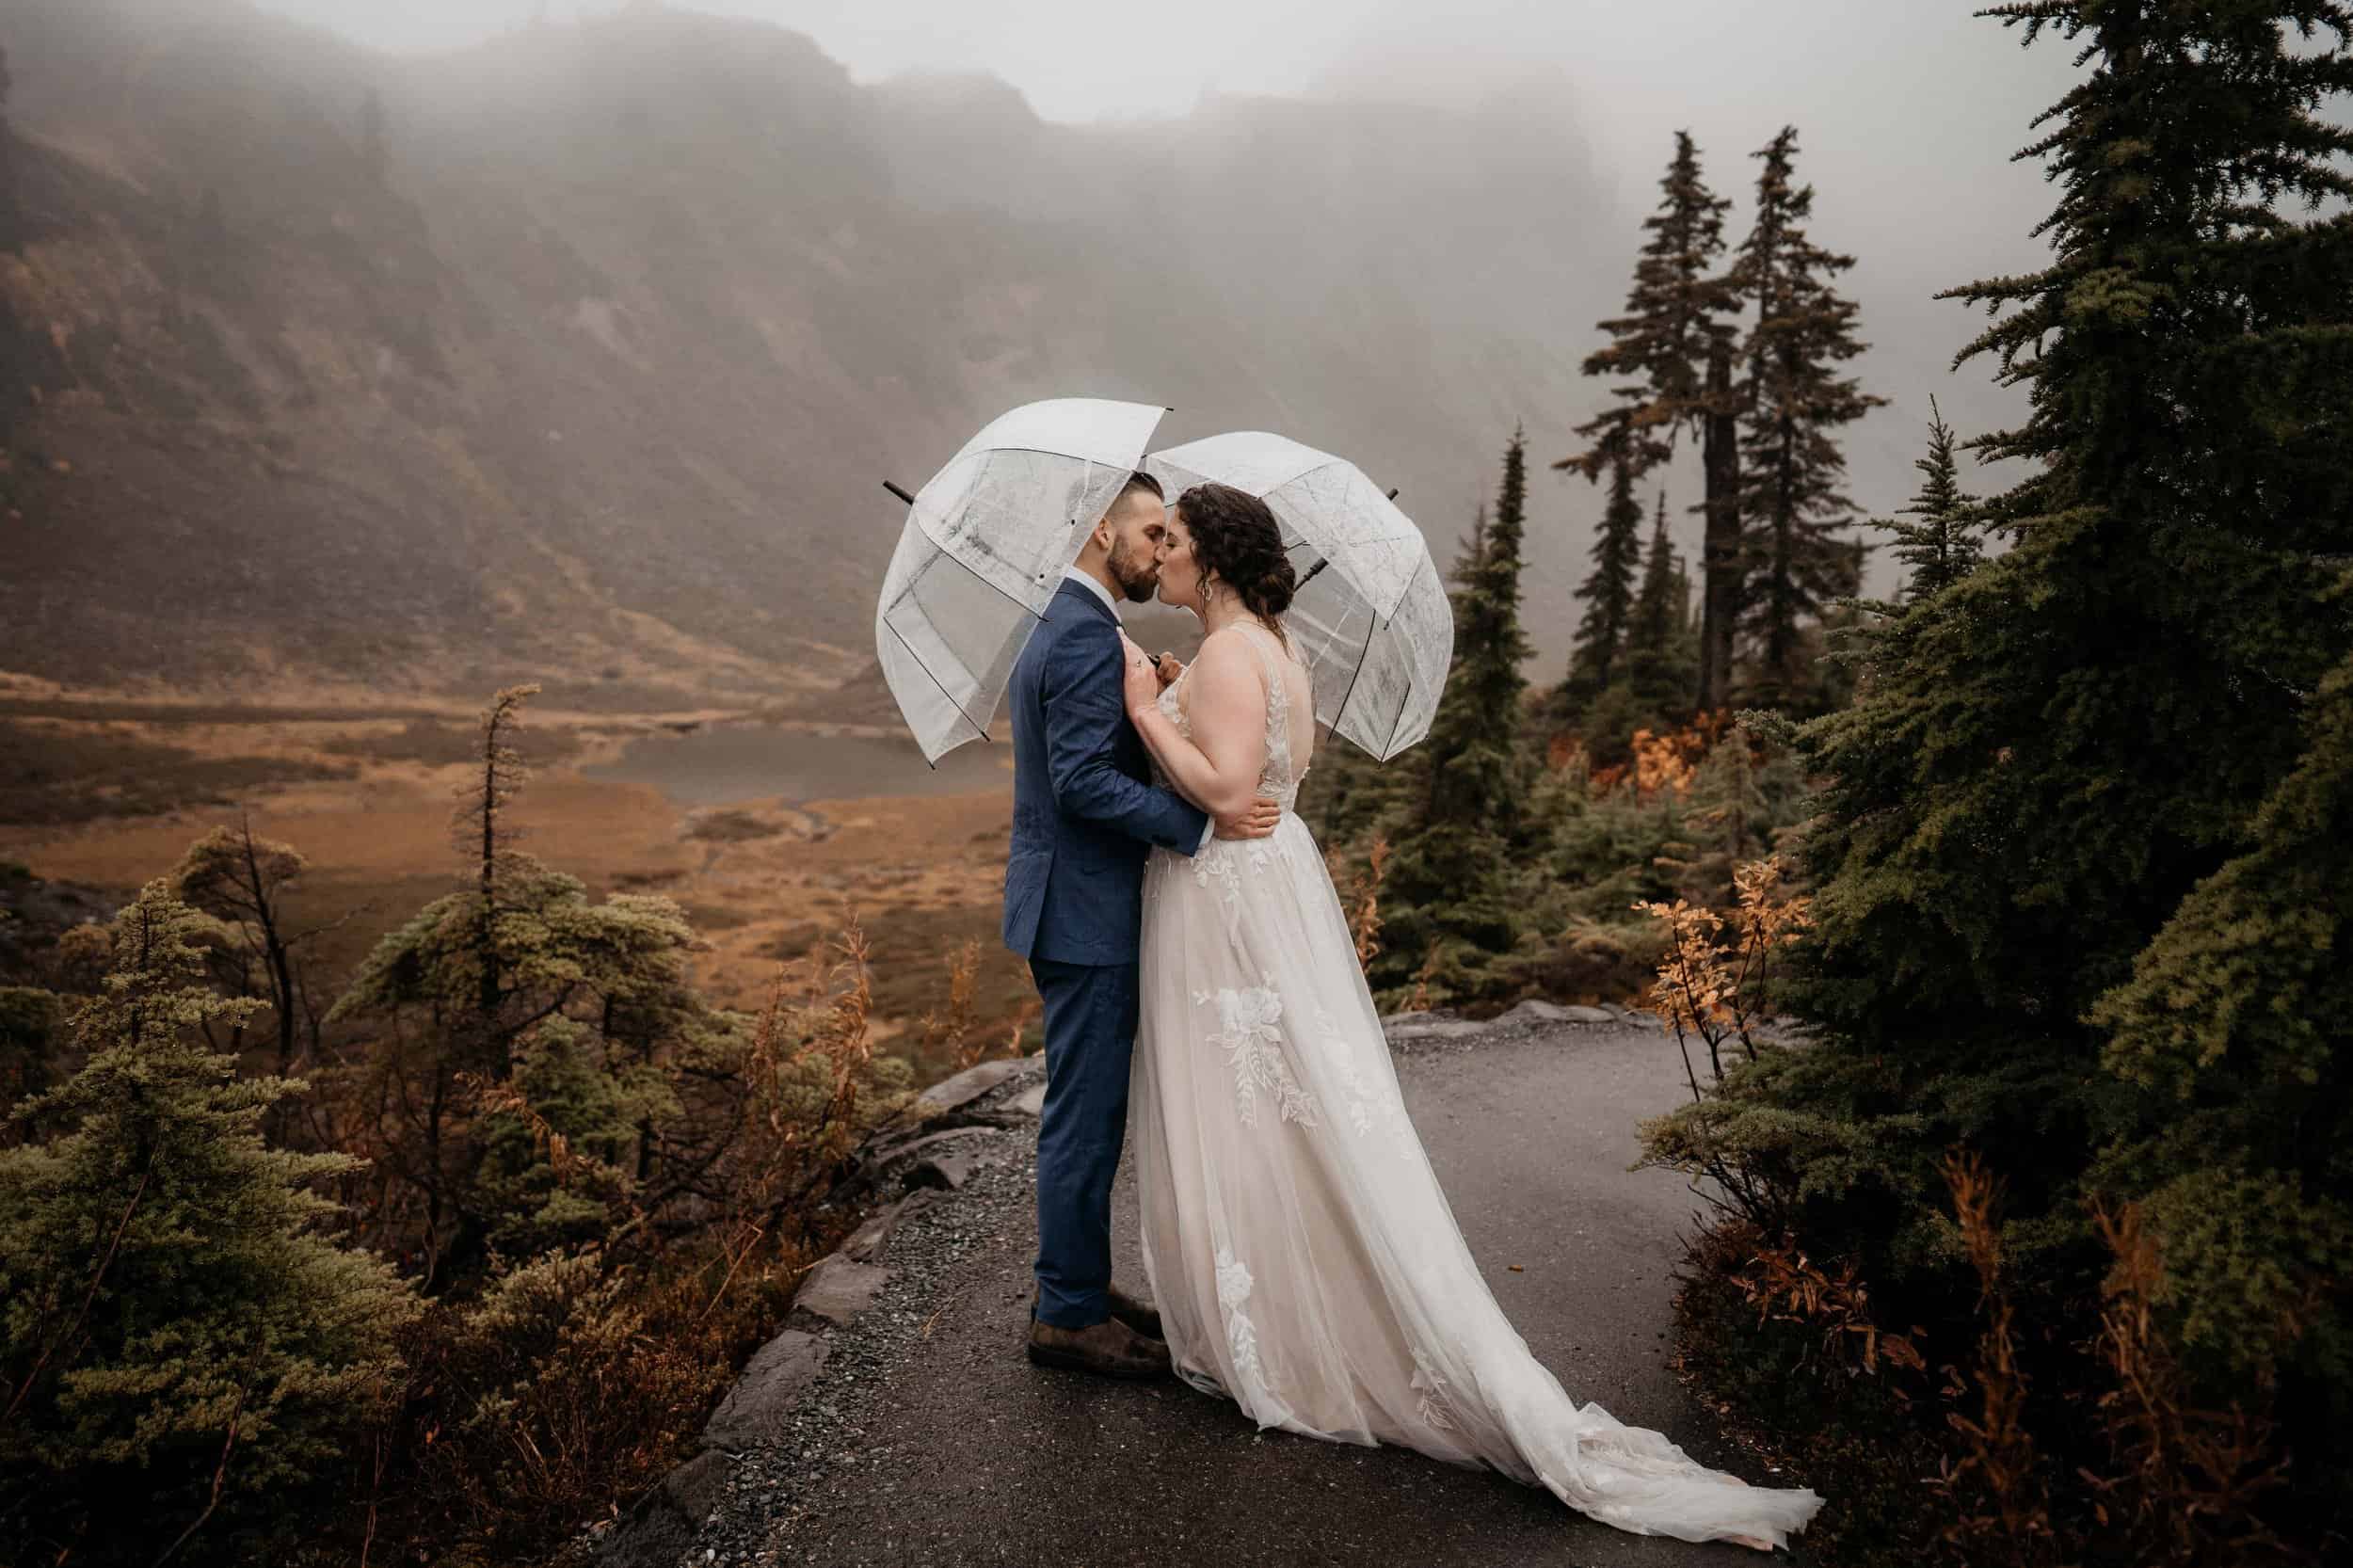 How to legally get married in Washington State